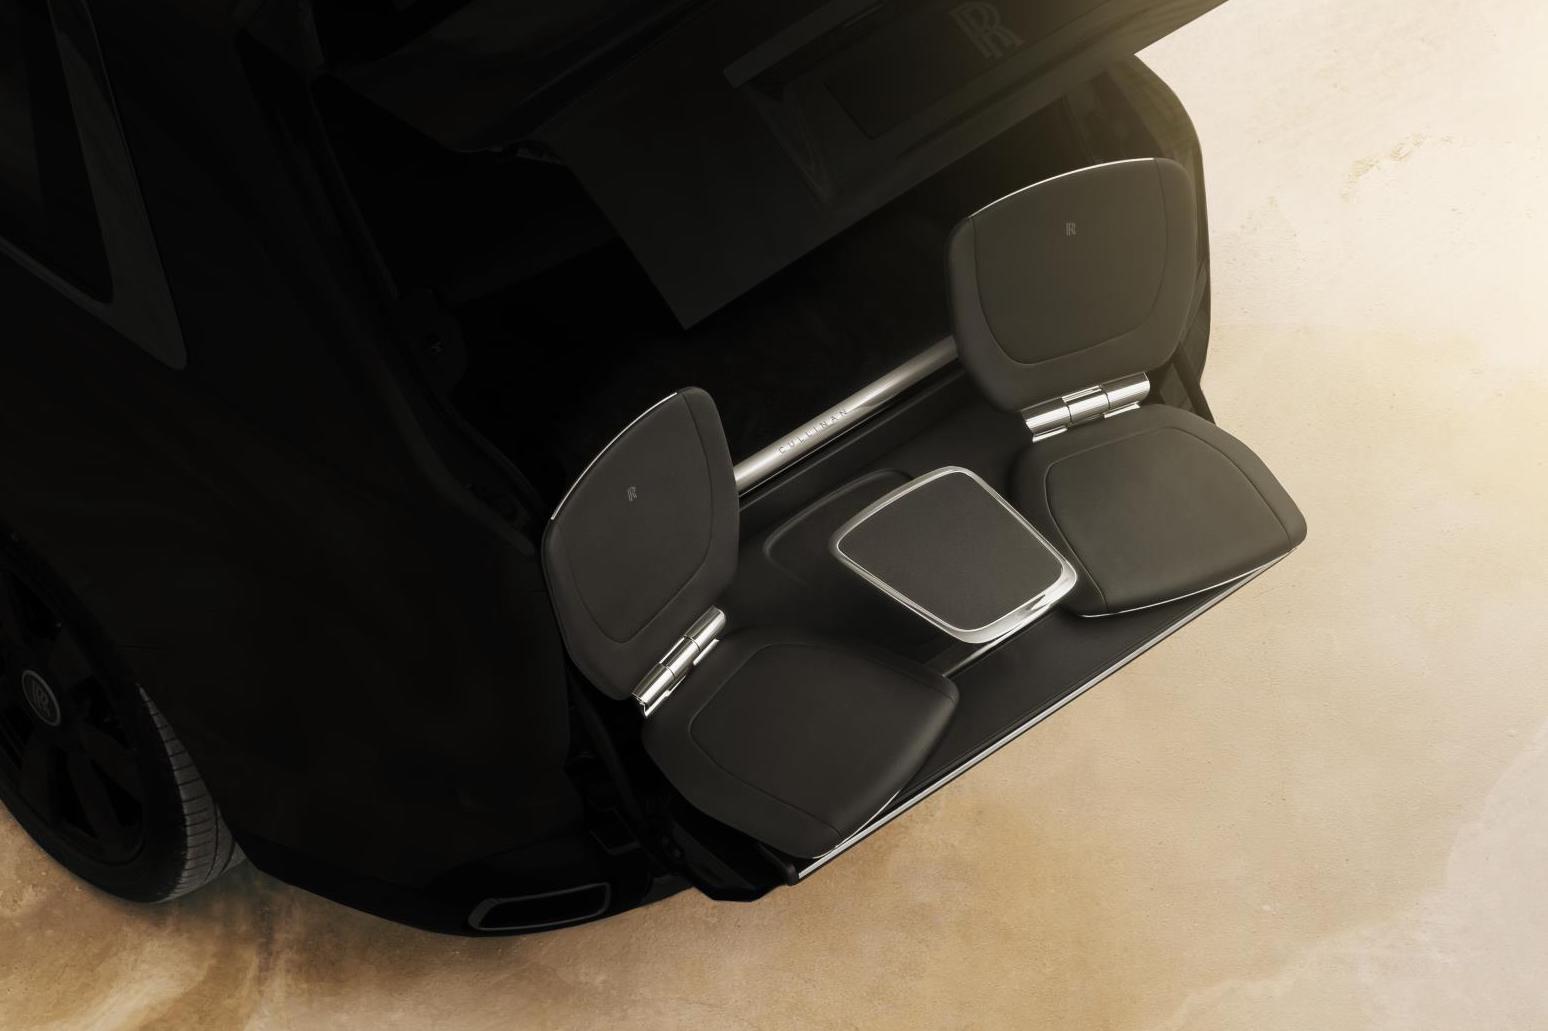 Rolls-Royce Cullinan features ‘Viewing Suite’ rear seats